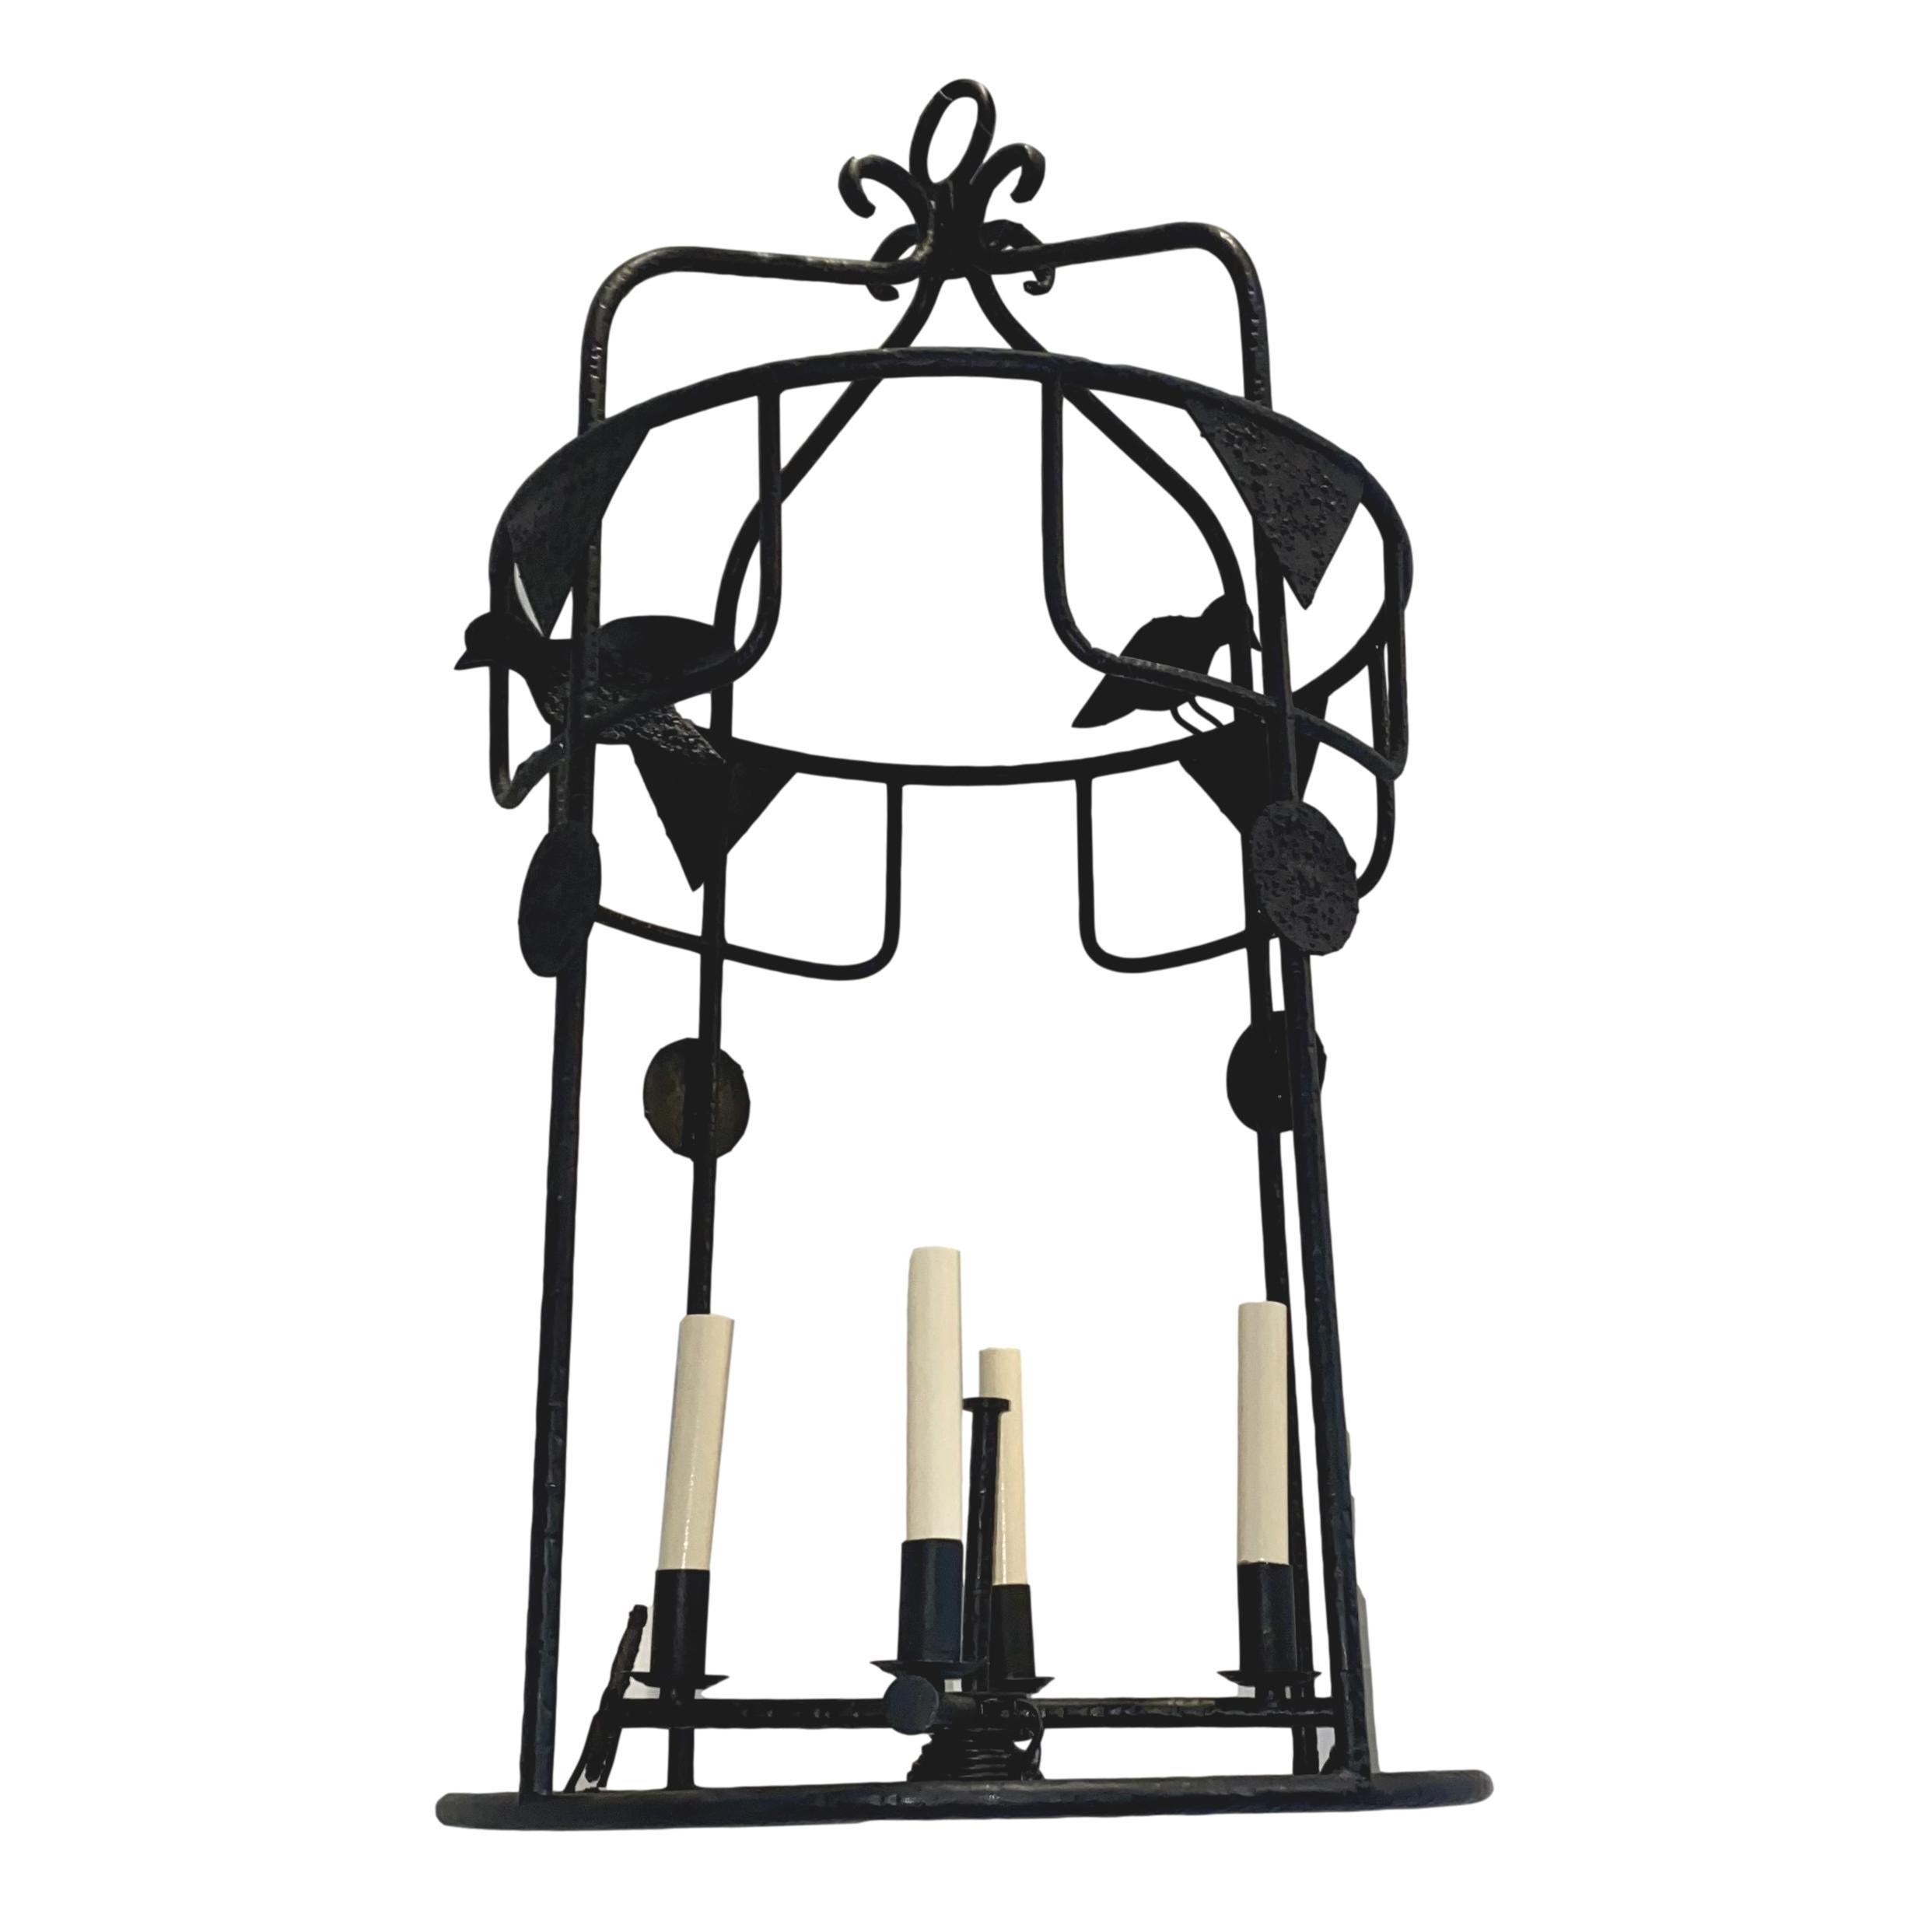 A circa 1960s Swedish hammered wrought iron open-panel lantern with figures of birds and a four-light central cluster of candelabra lights.
Measurements:
Minimum drop: 36